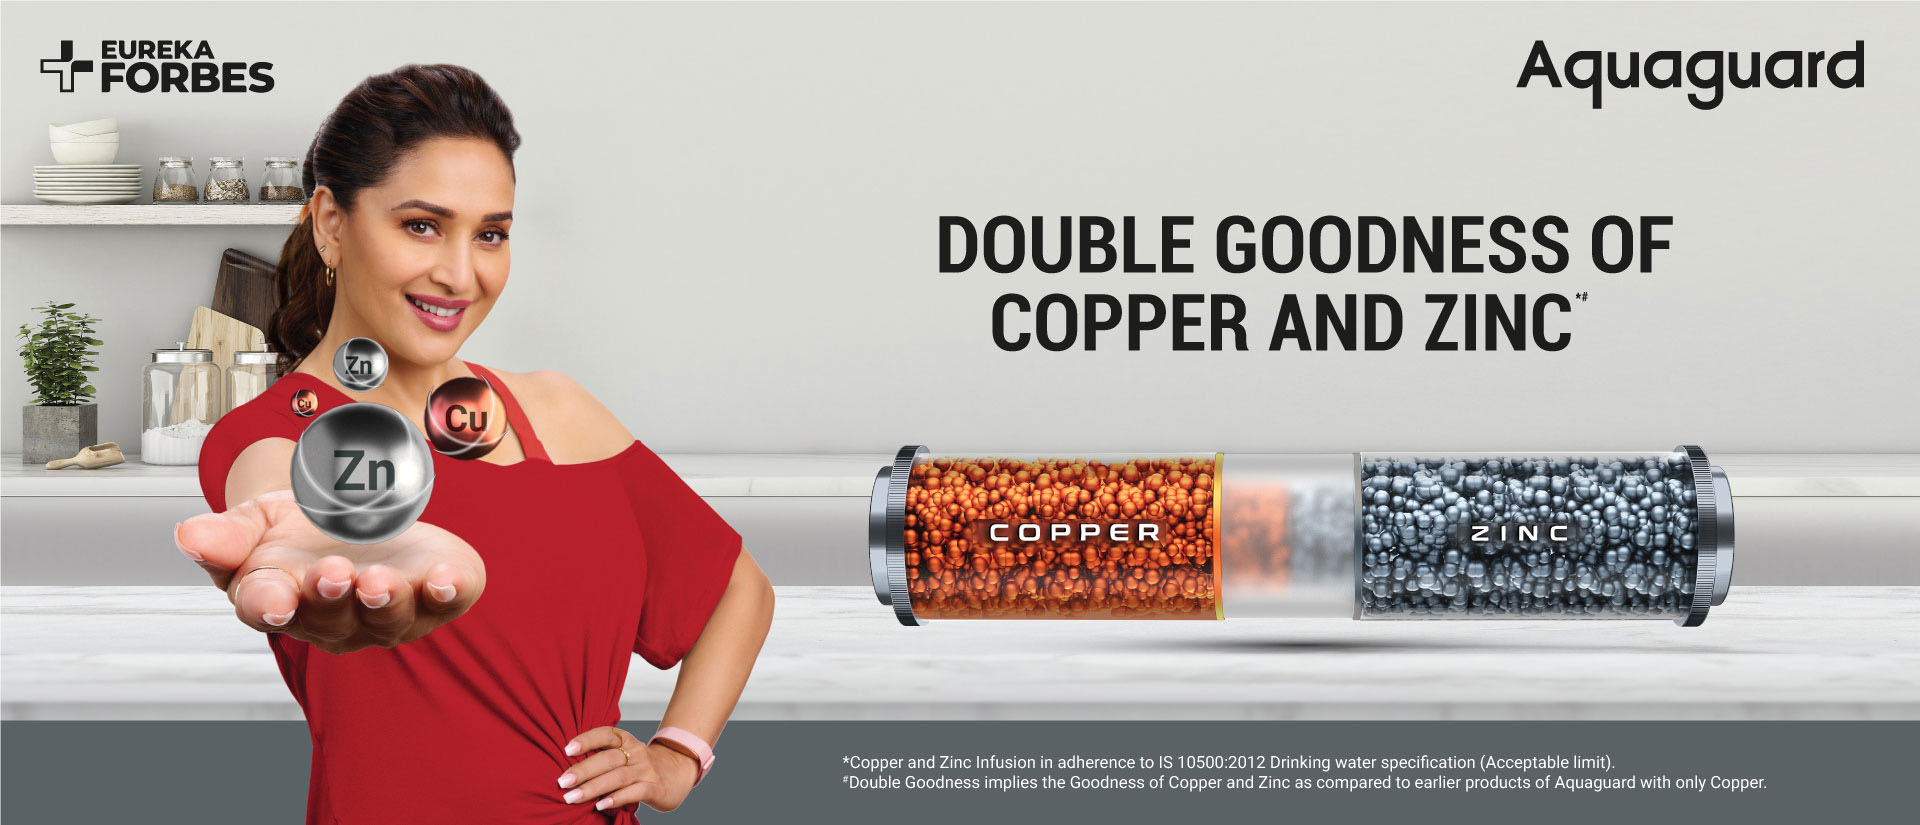 DOUBLE GOODNESS OF COPPER AND ZINC™*#